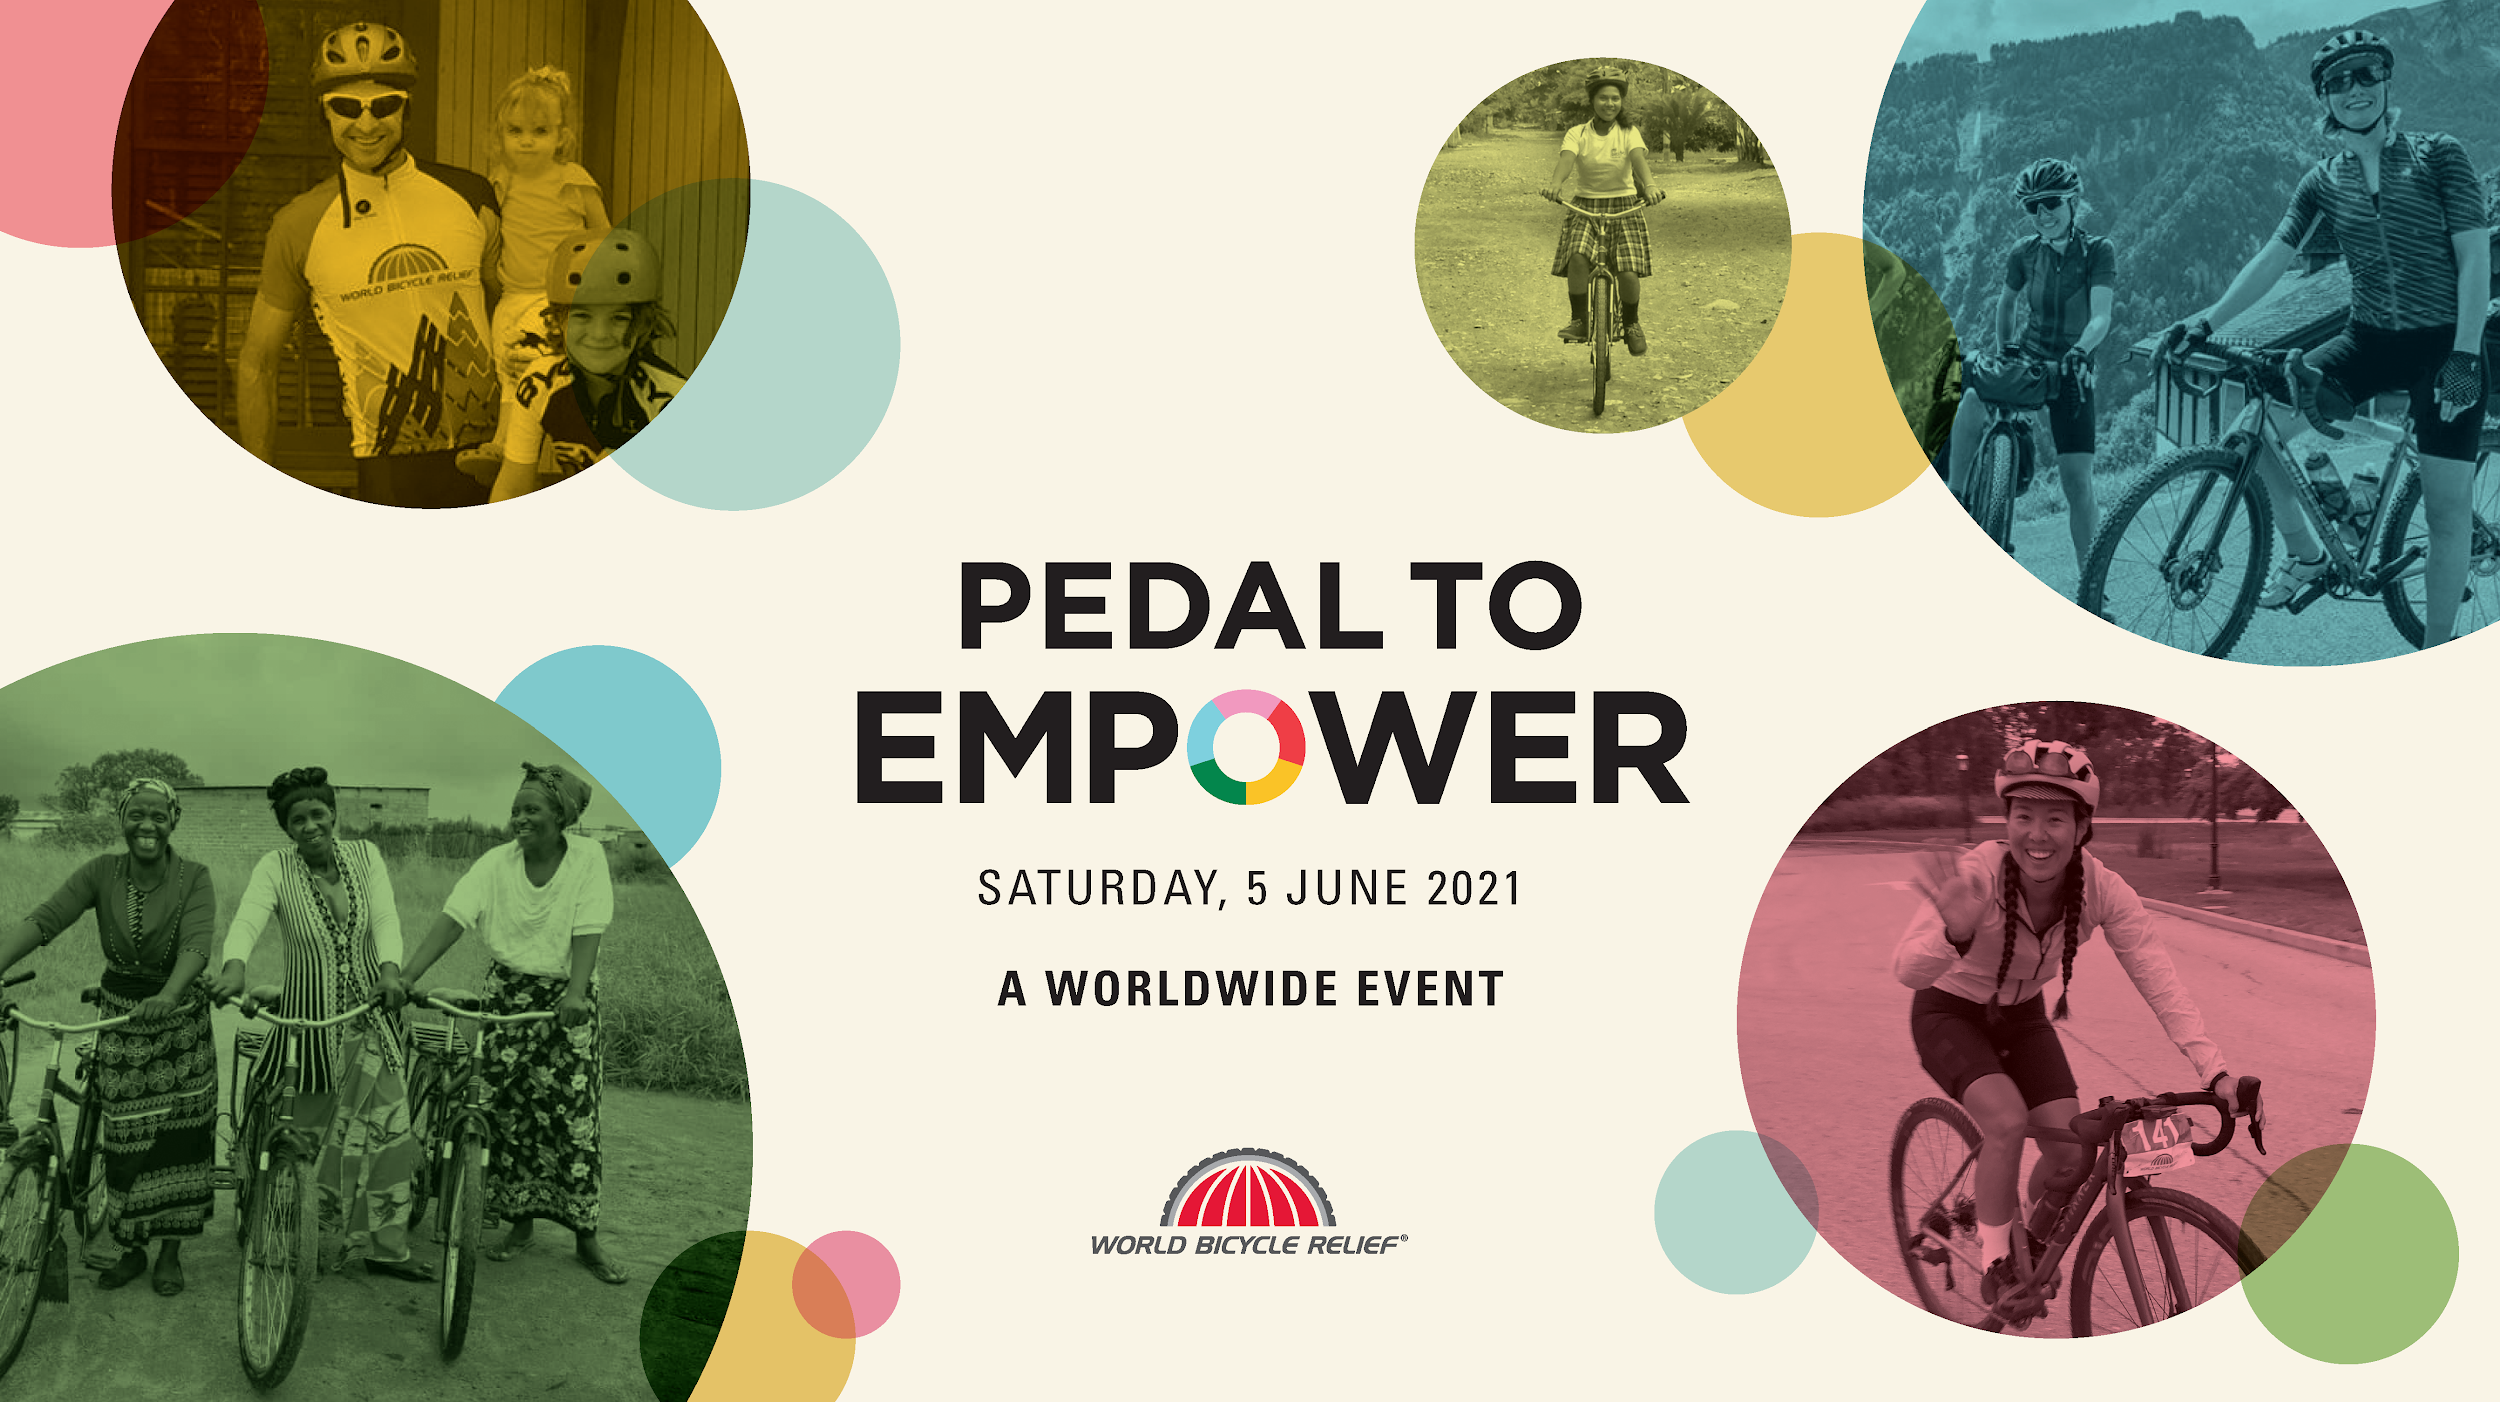 PEDAL TO EMPOWER